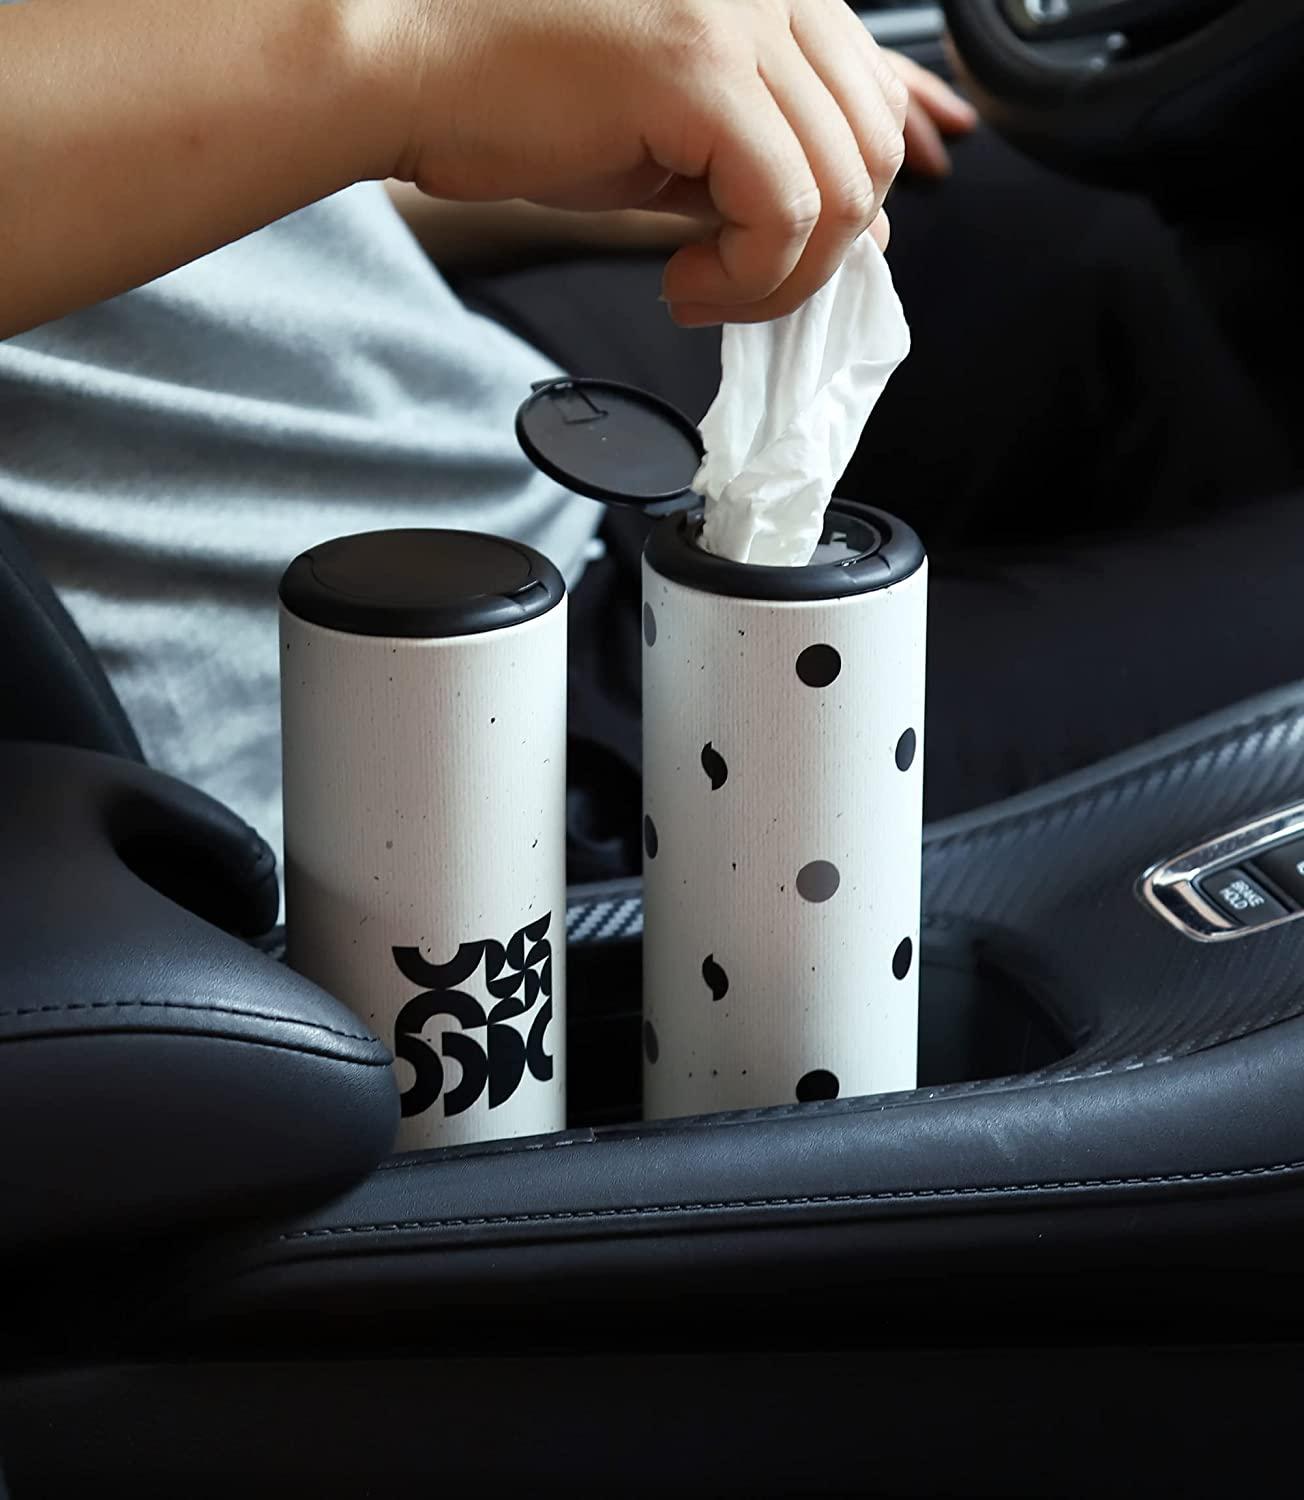 Car Tissue Holder with Facial Tissues Bulk - 4 PK Car Tissues Cylinder with Cap, Tissue Holder for Car, Travel Tissues Fit for Car Cup Holder, Refill Car Box Round Container